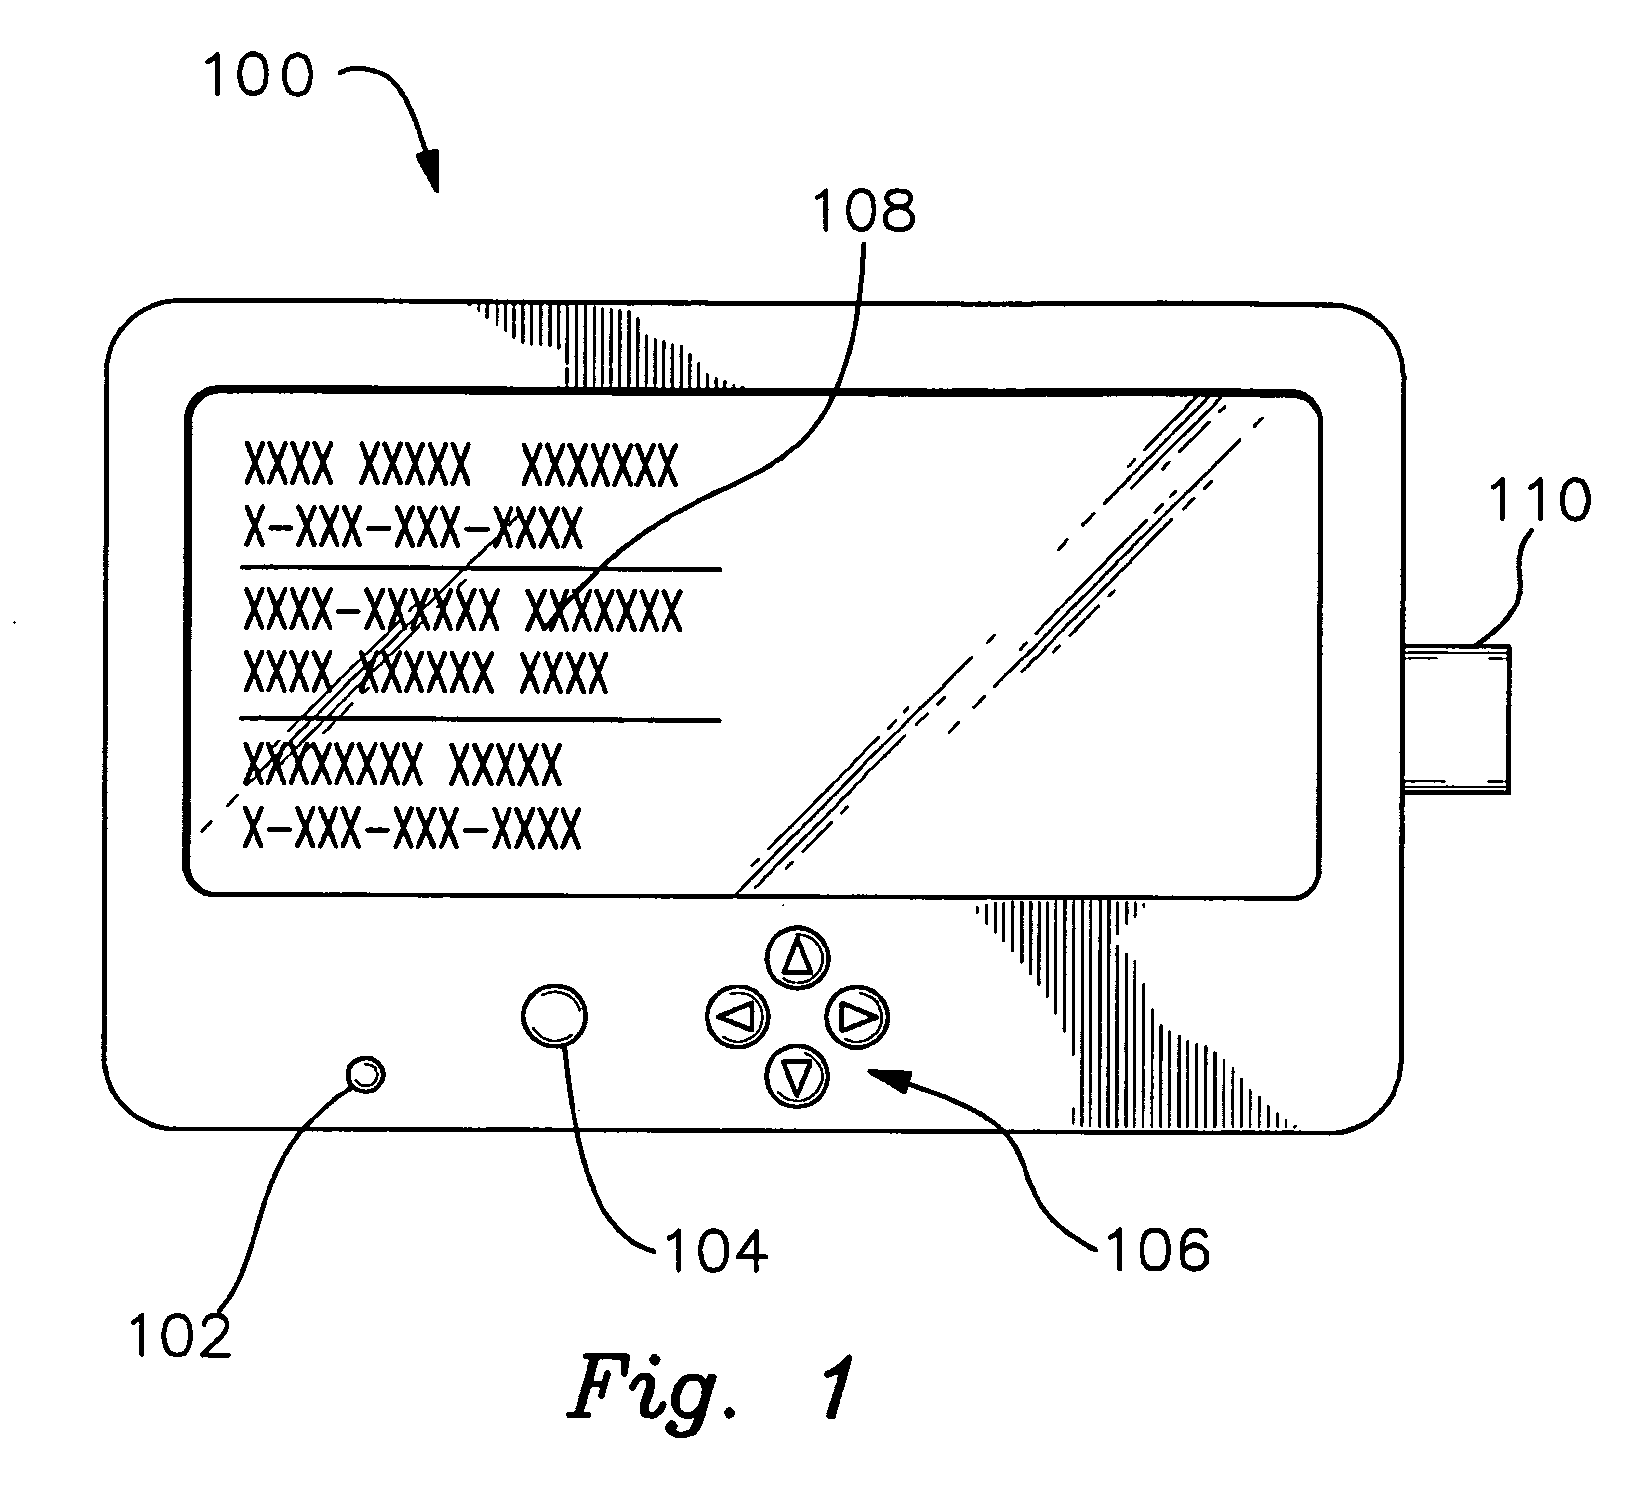 Methods and apparatus for digital audio, video, and data player and recorder and business method of managing medical information on a branded data storage device